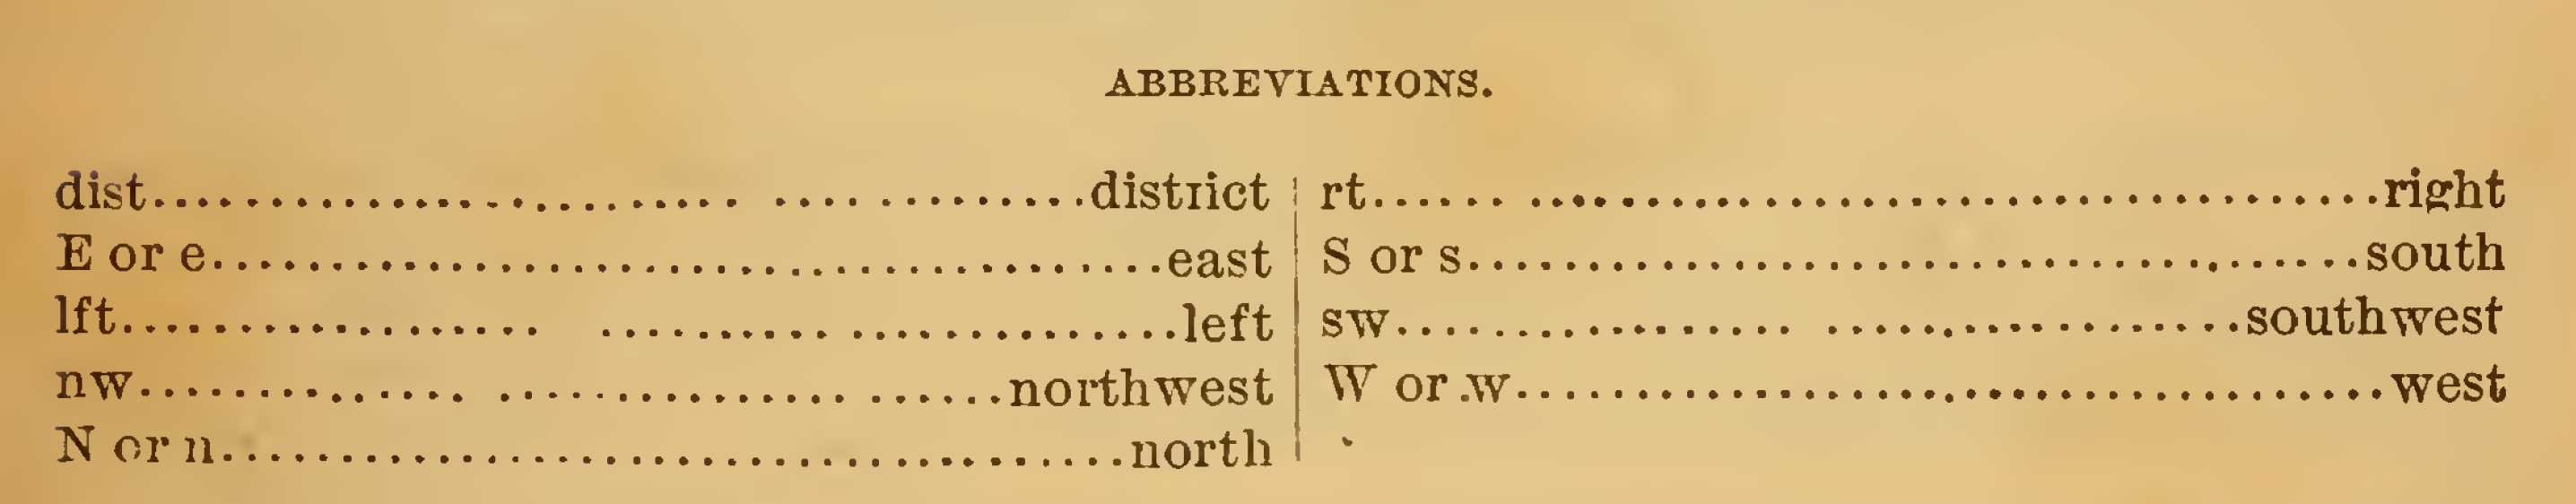 https://louisiana-anthology.org/texts/coleman/images/abbrev.png